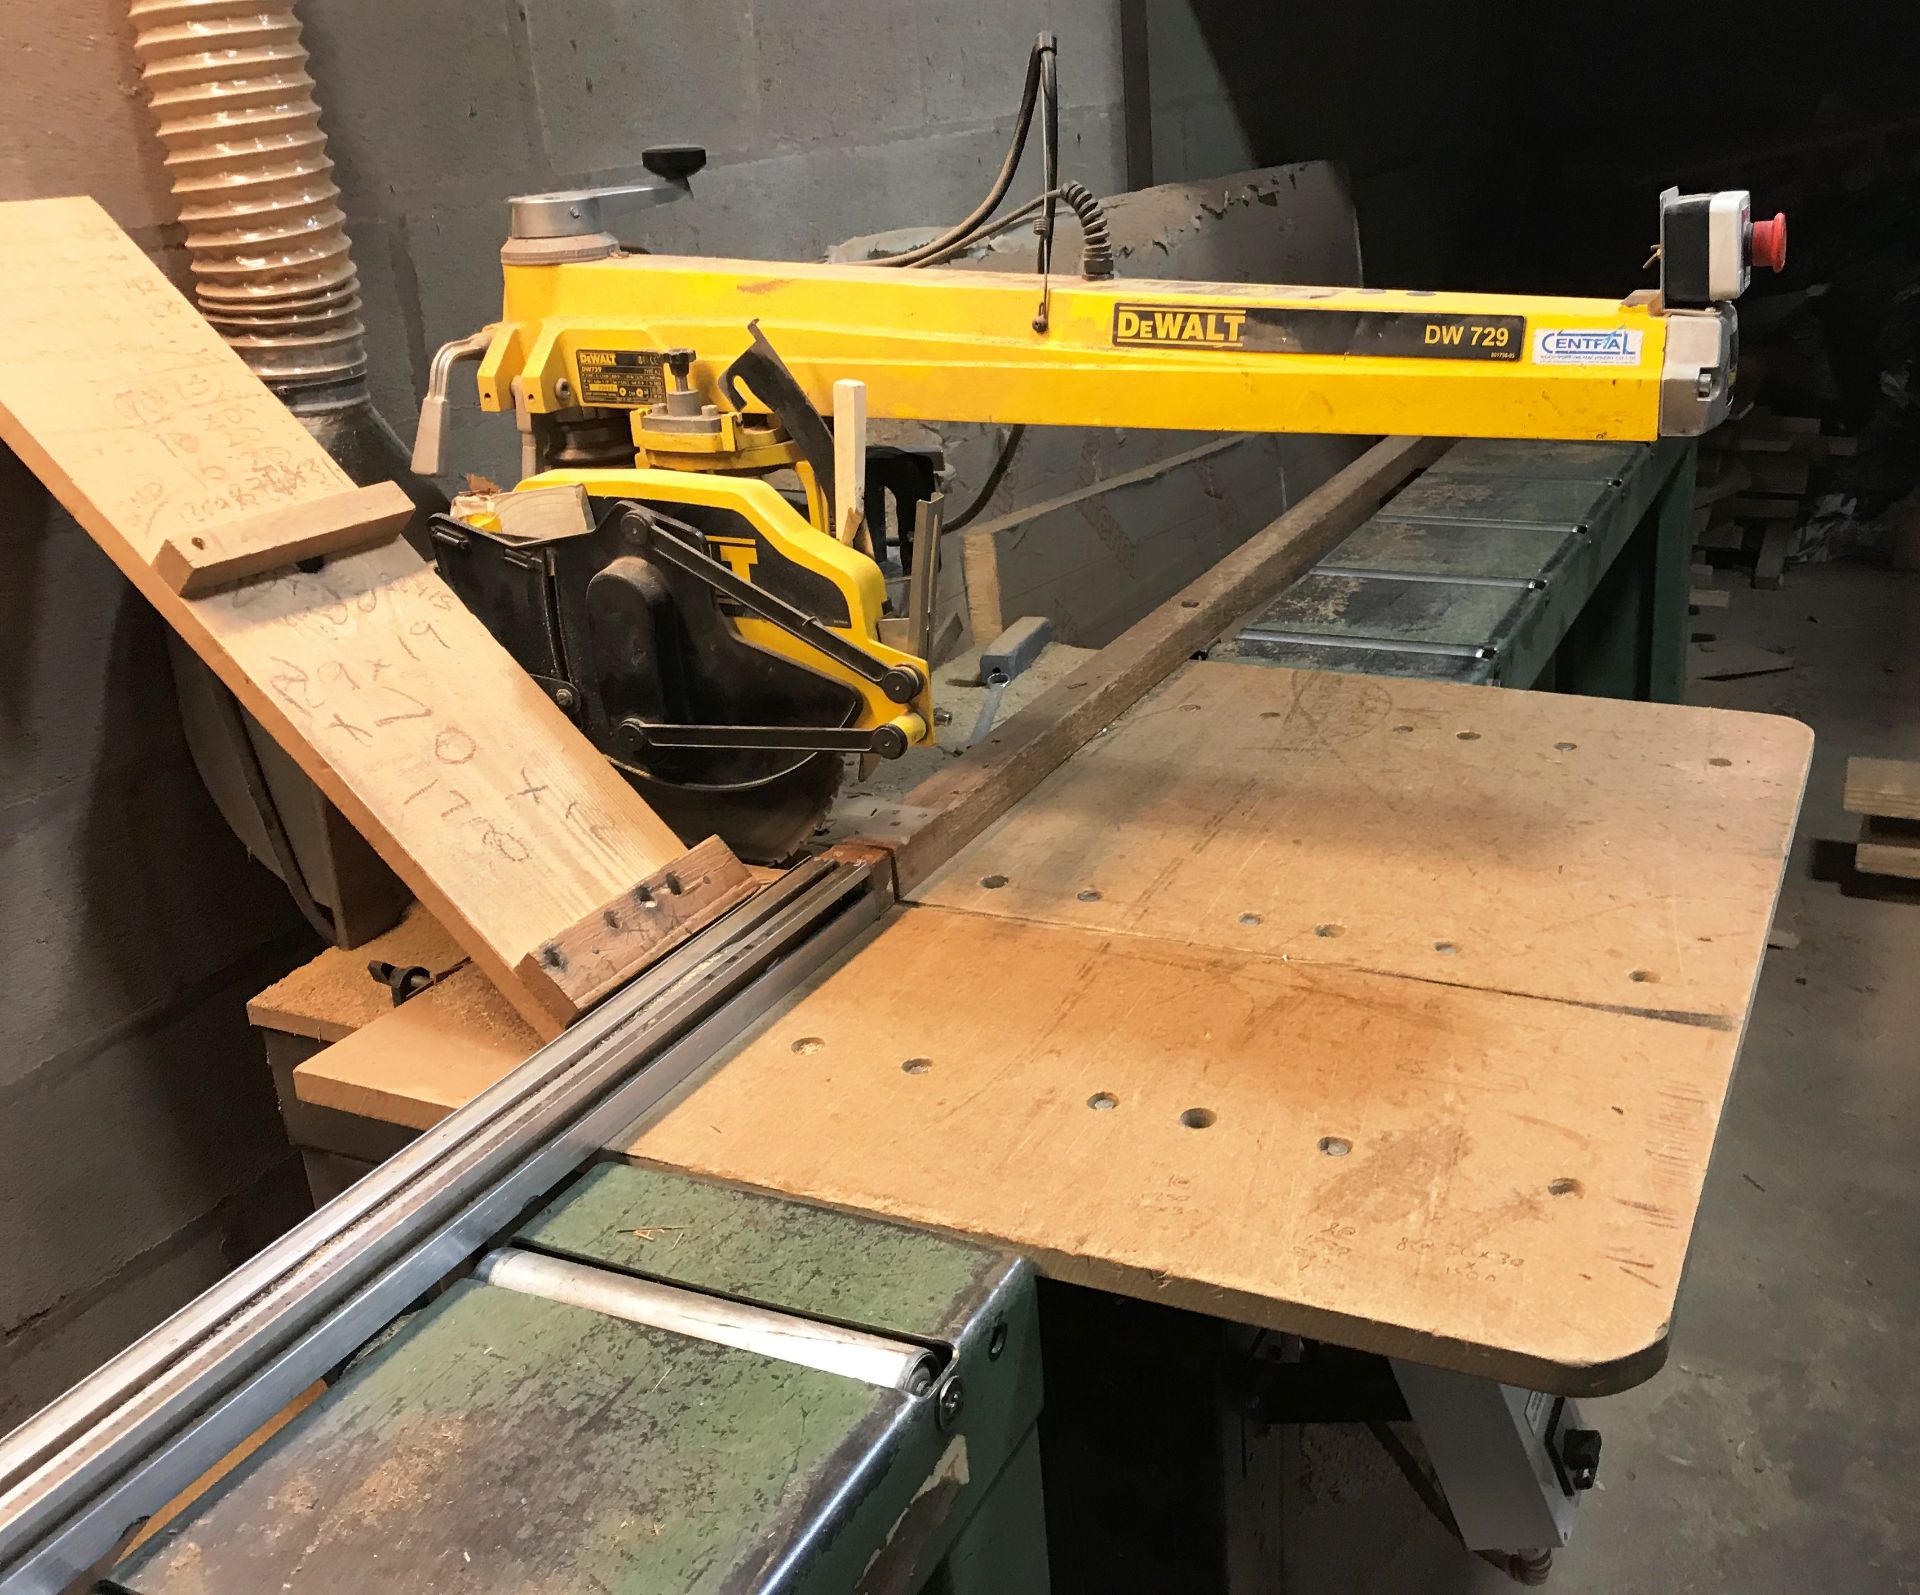 Dewalt DW729 Cross Cut Saw w/ Roller Feed In/Out & Measuring Bar | 3 Phase - Image 7 of 7